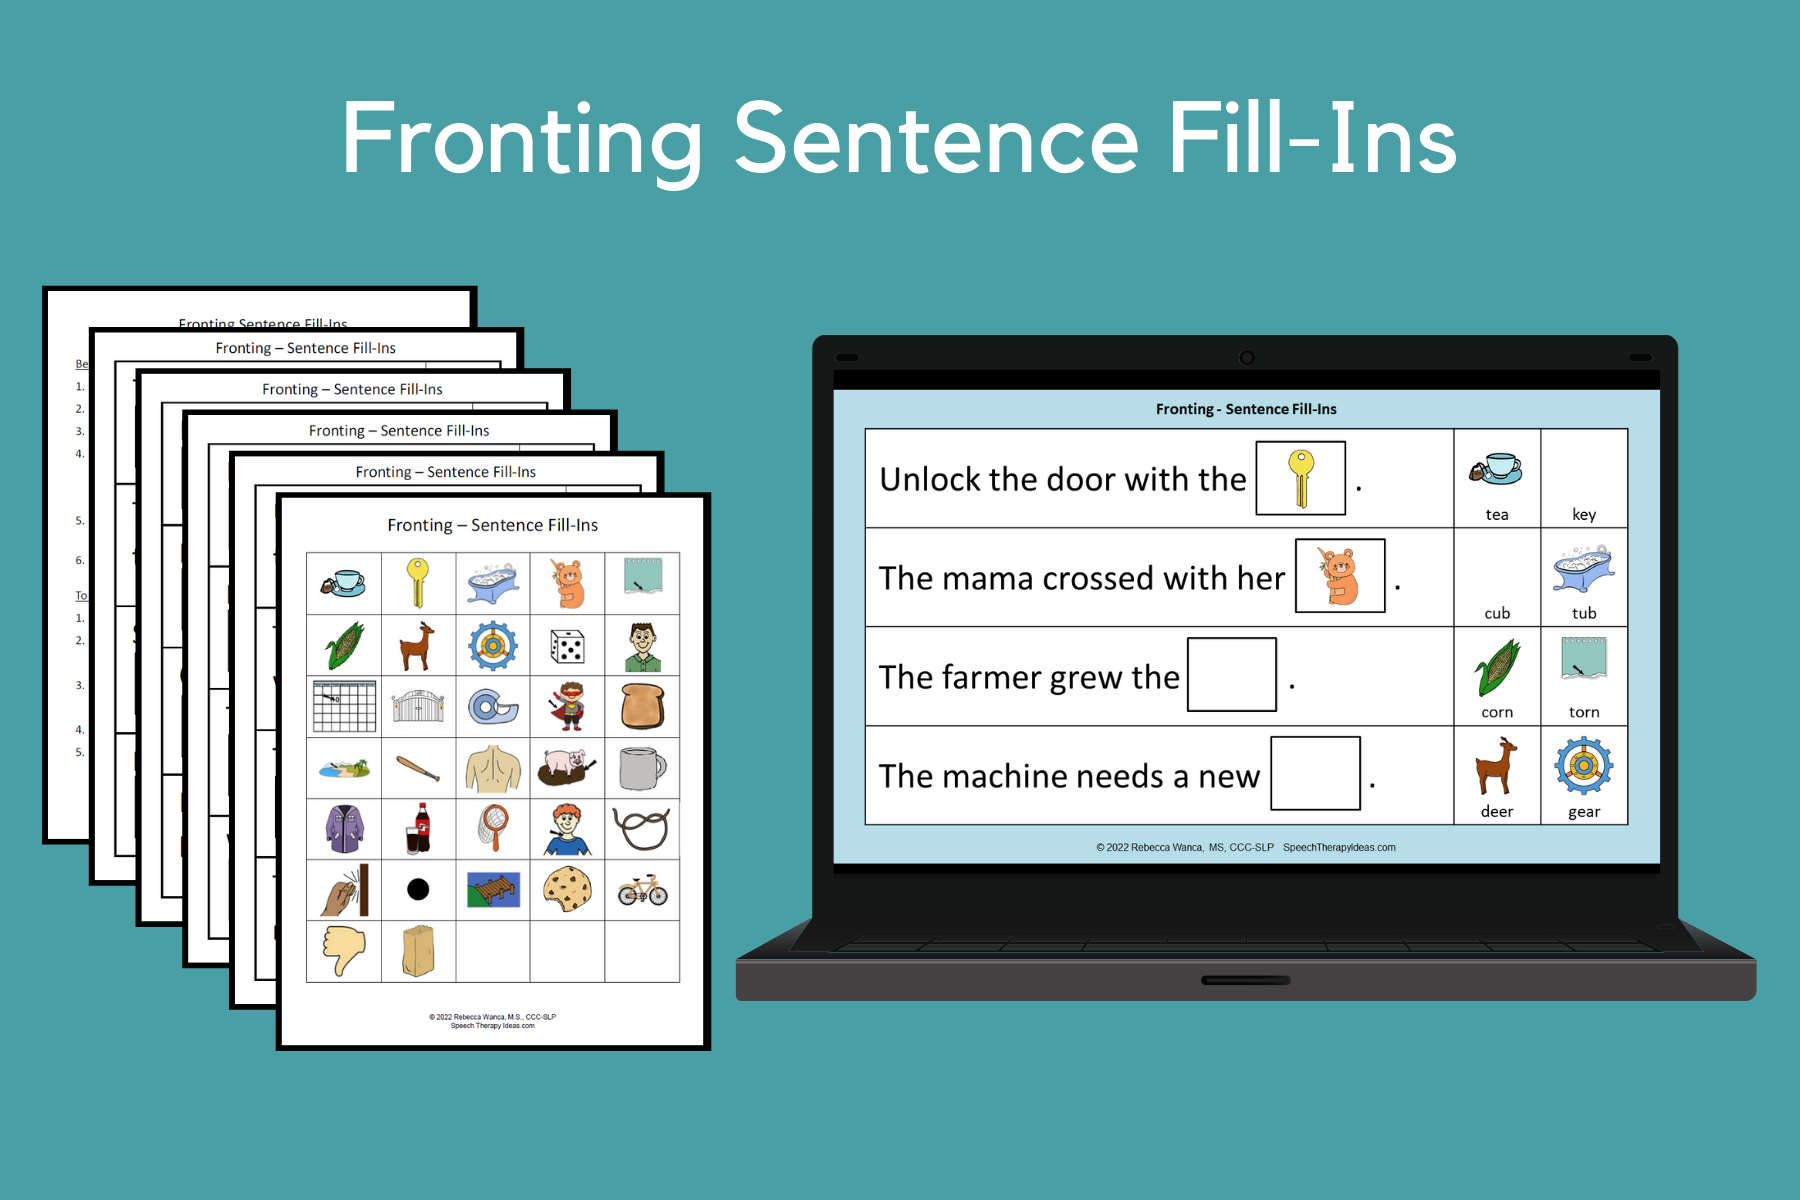 Fronting Sentence Fill-Ins